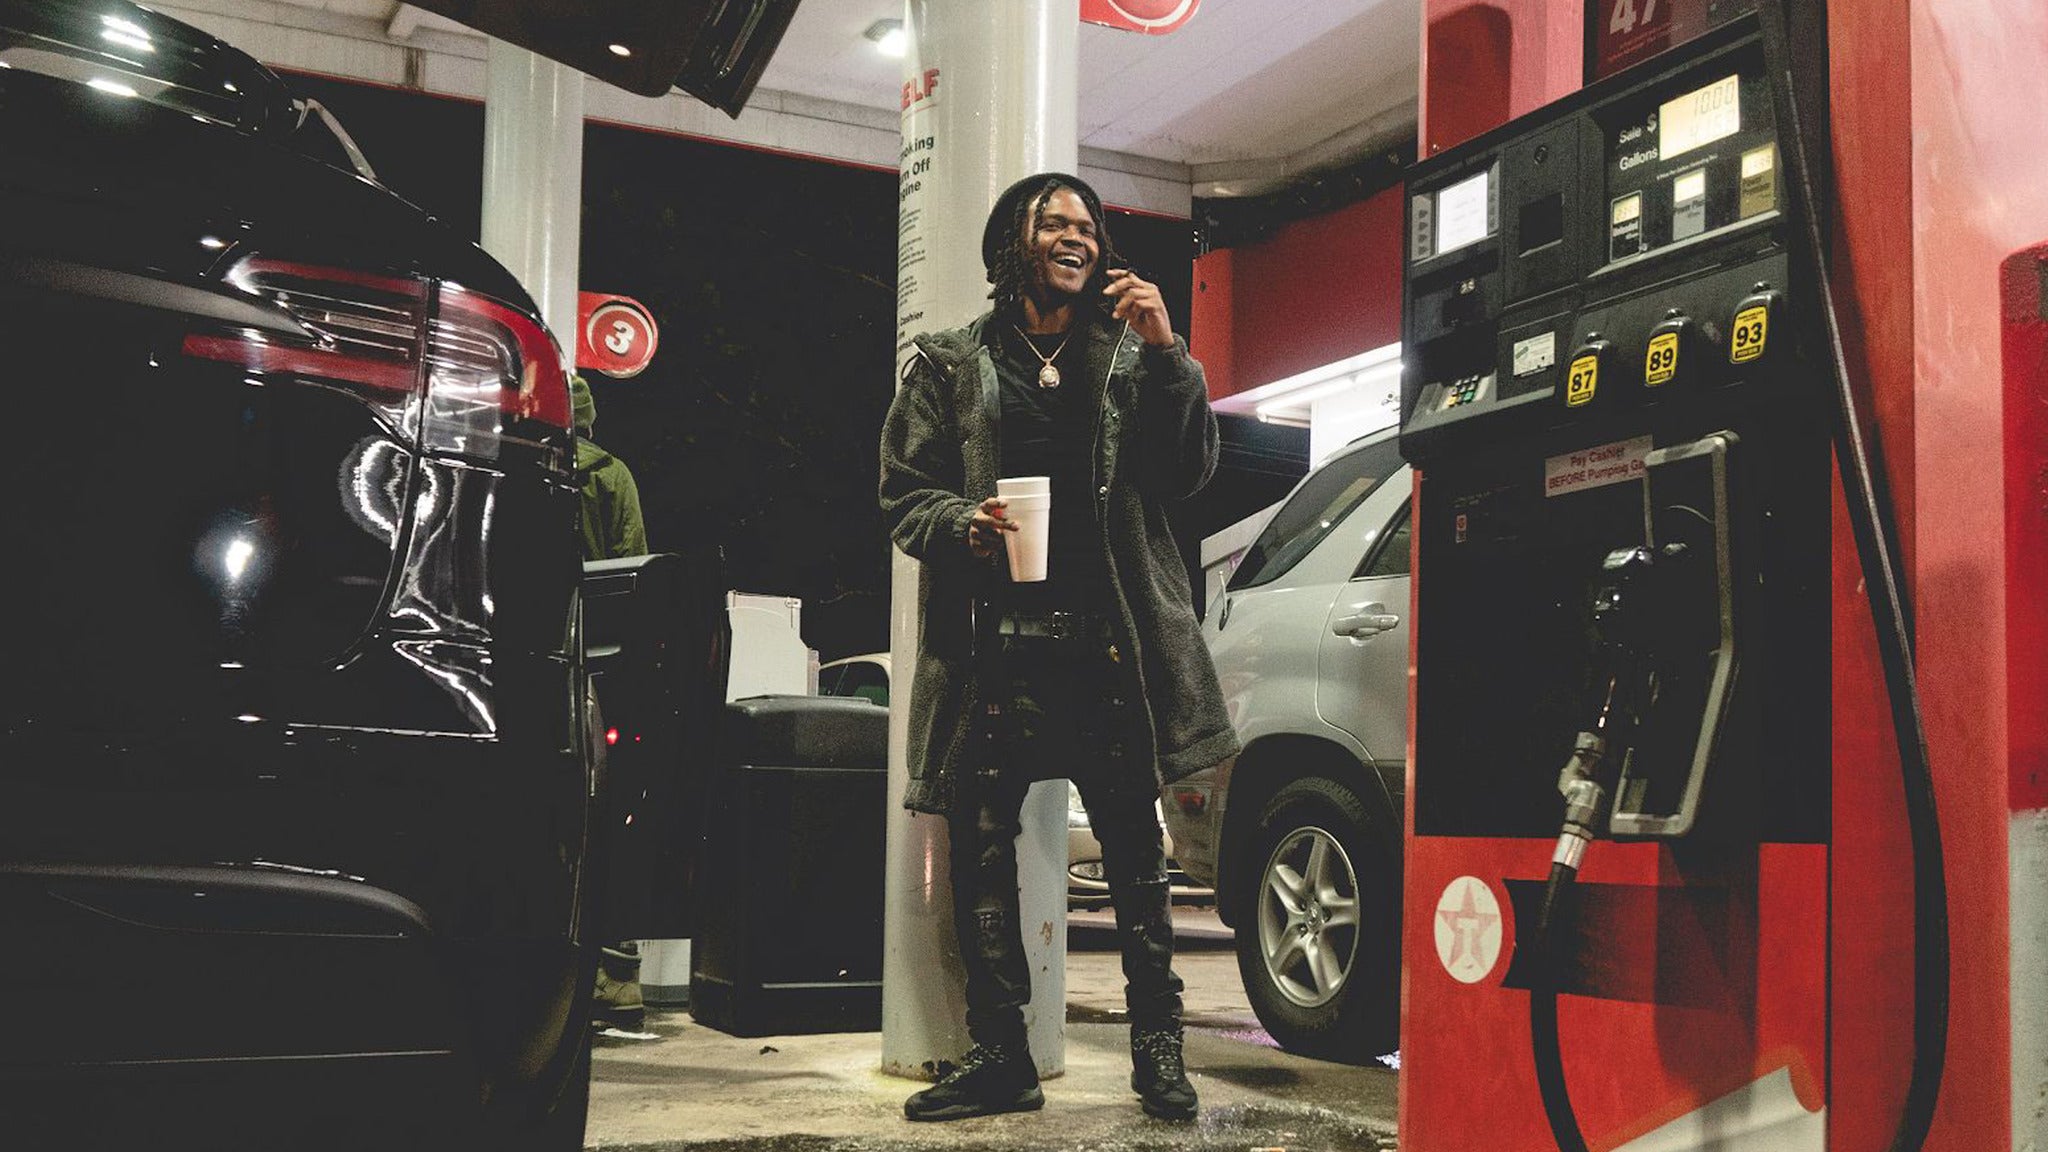 Young Nudy - DR. EV4L VS. RICH SHOOTER TOUR presale password for early tickets in Philadelphia